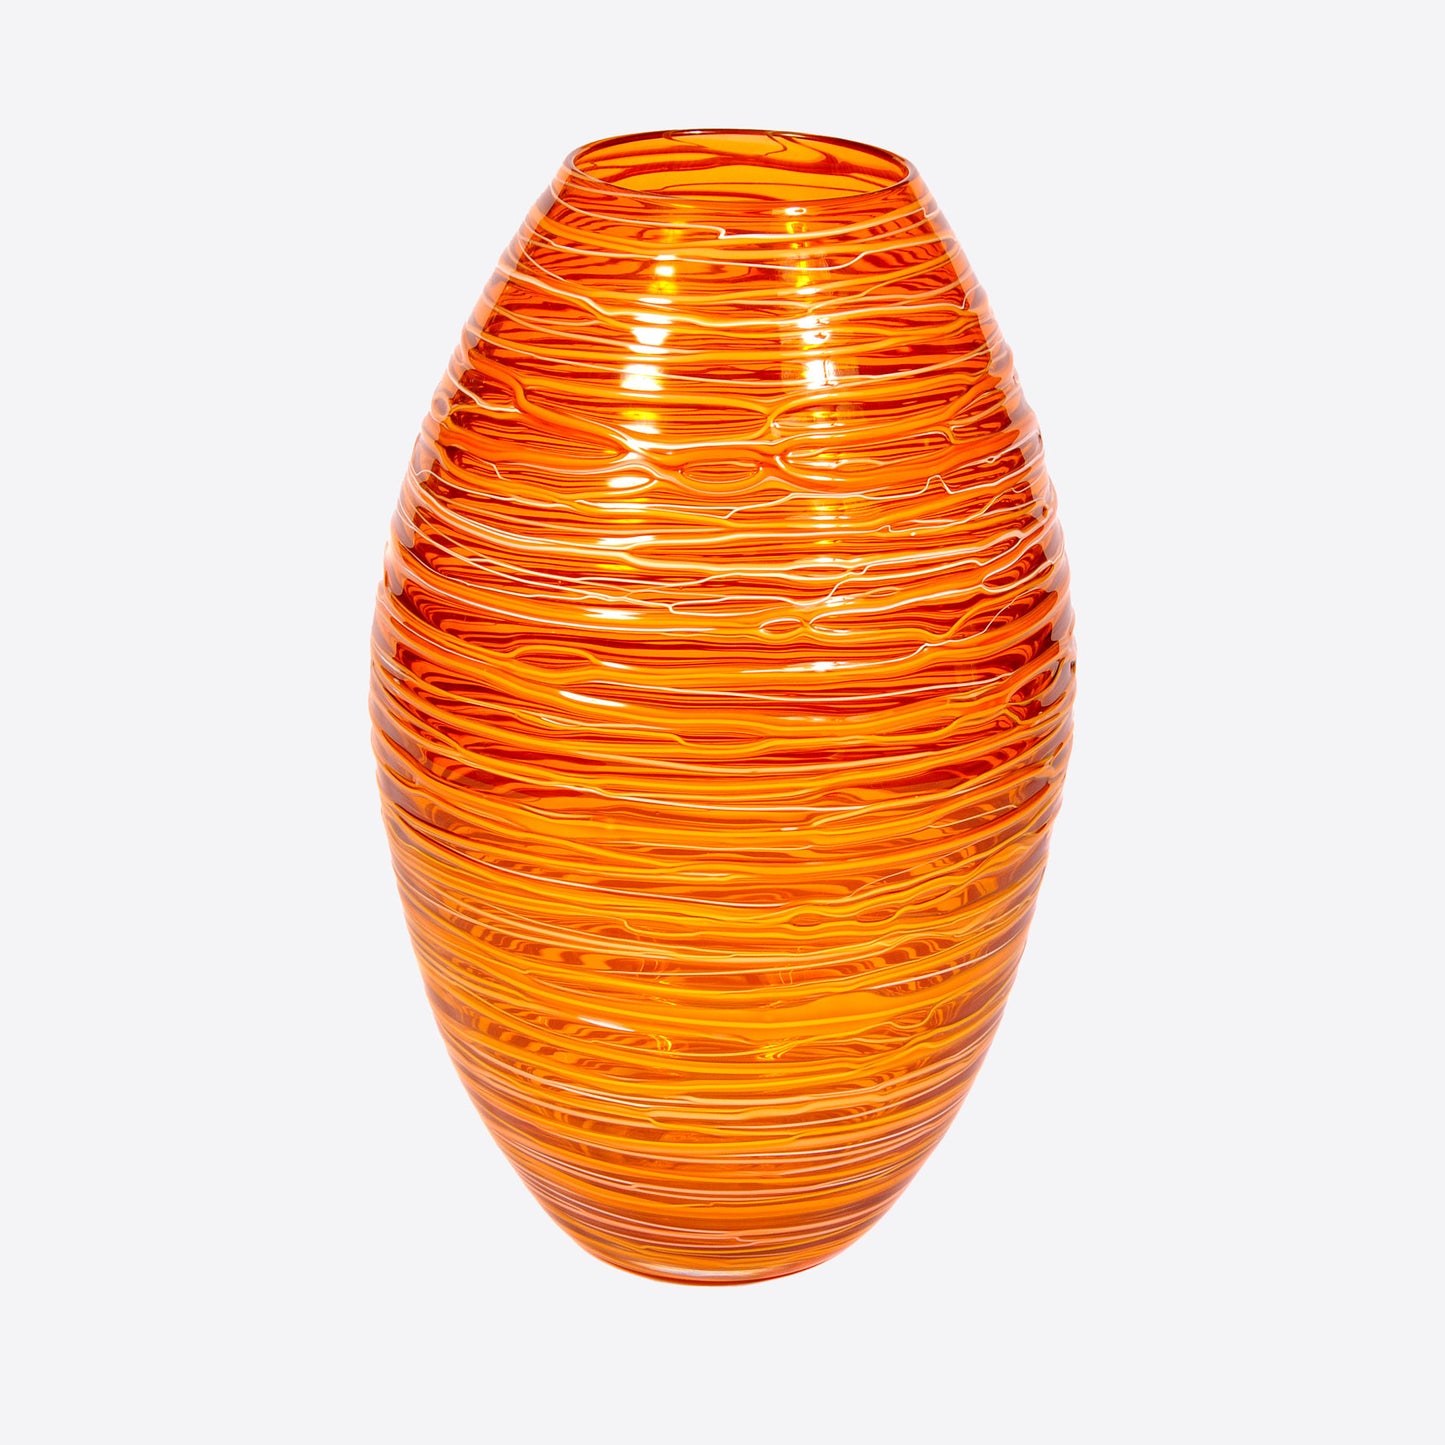 Large Amber Bound Vase Not specified